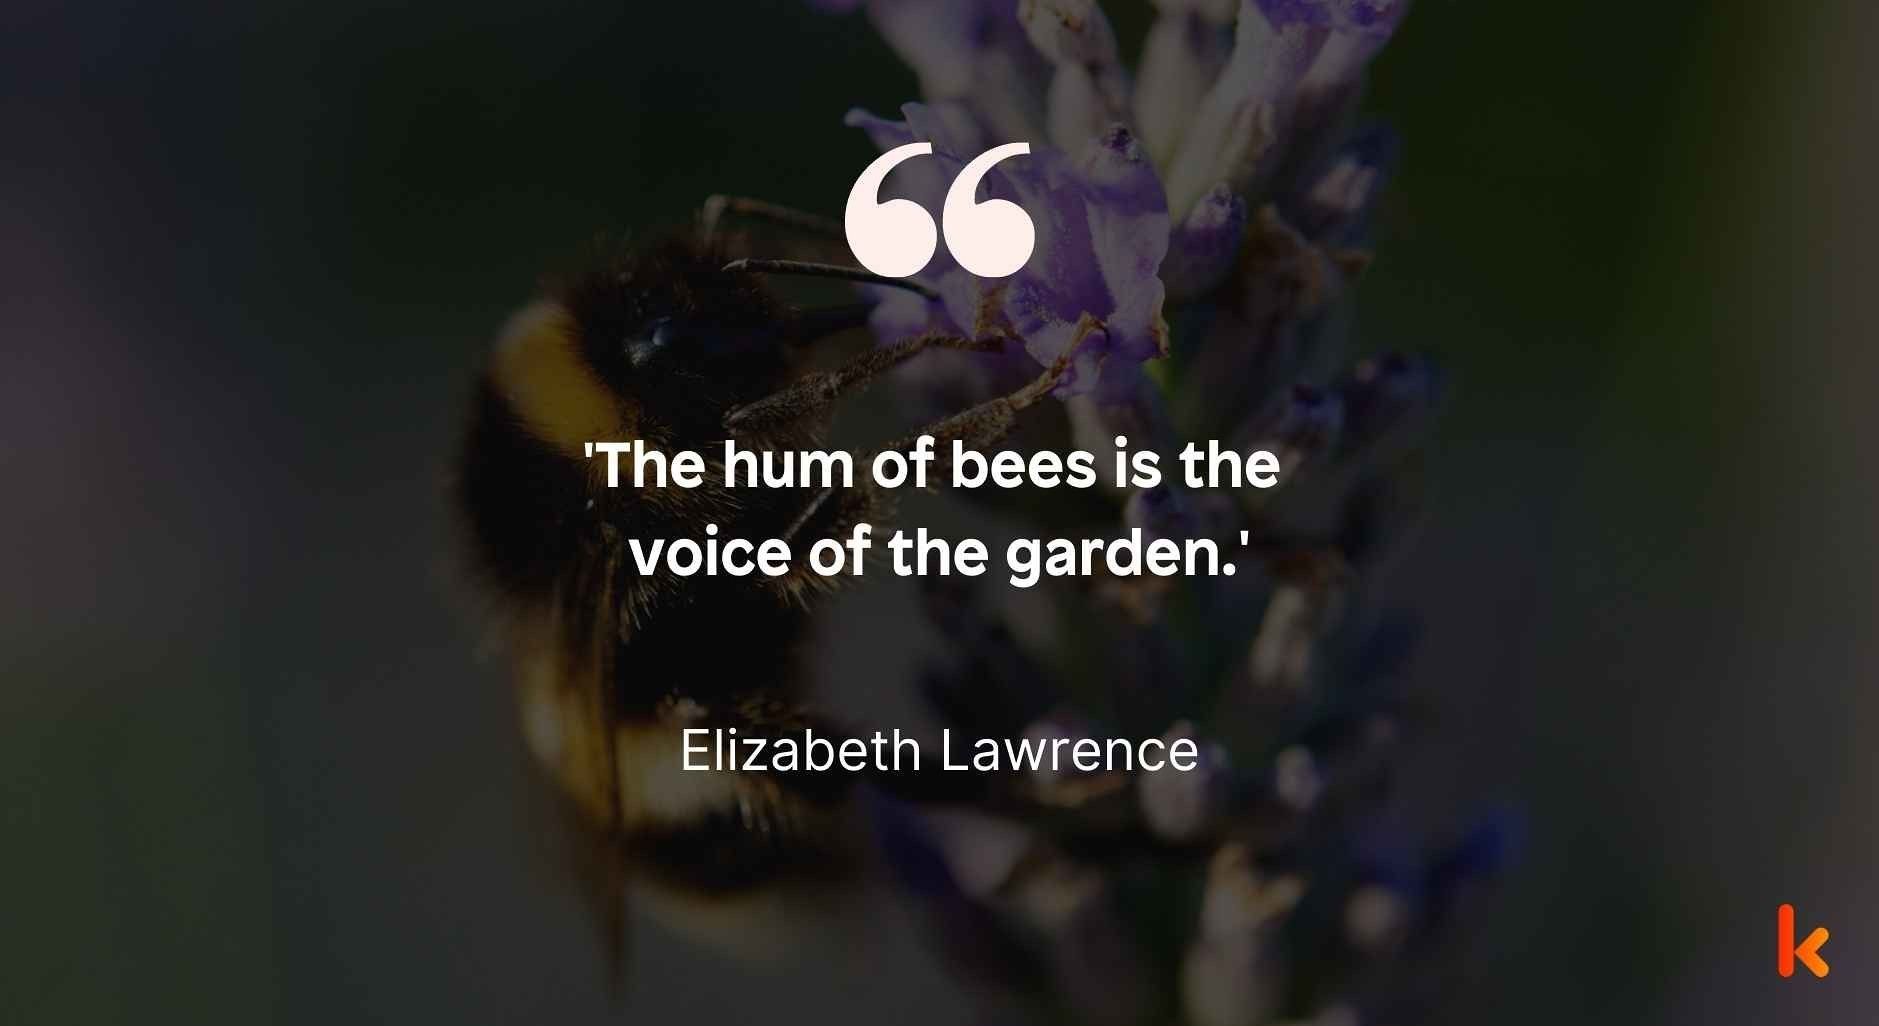 Bumblebee quote by Elizabeth Lawrence